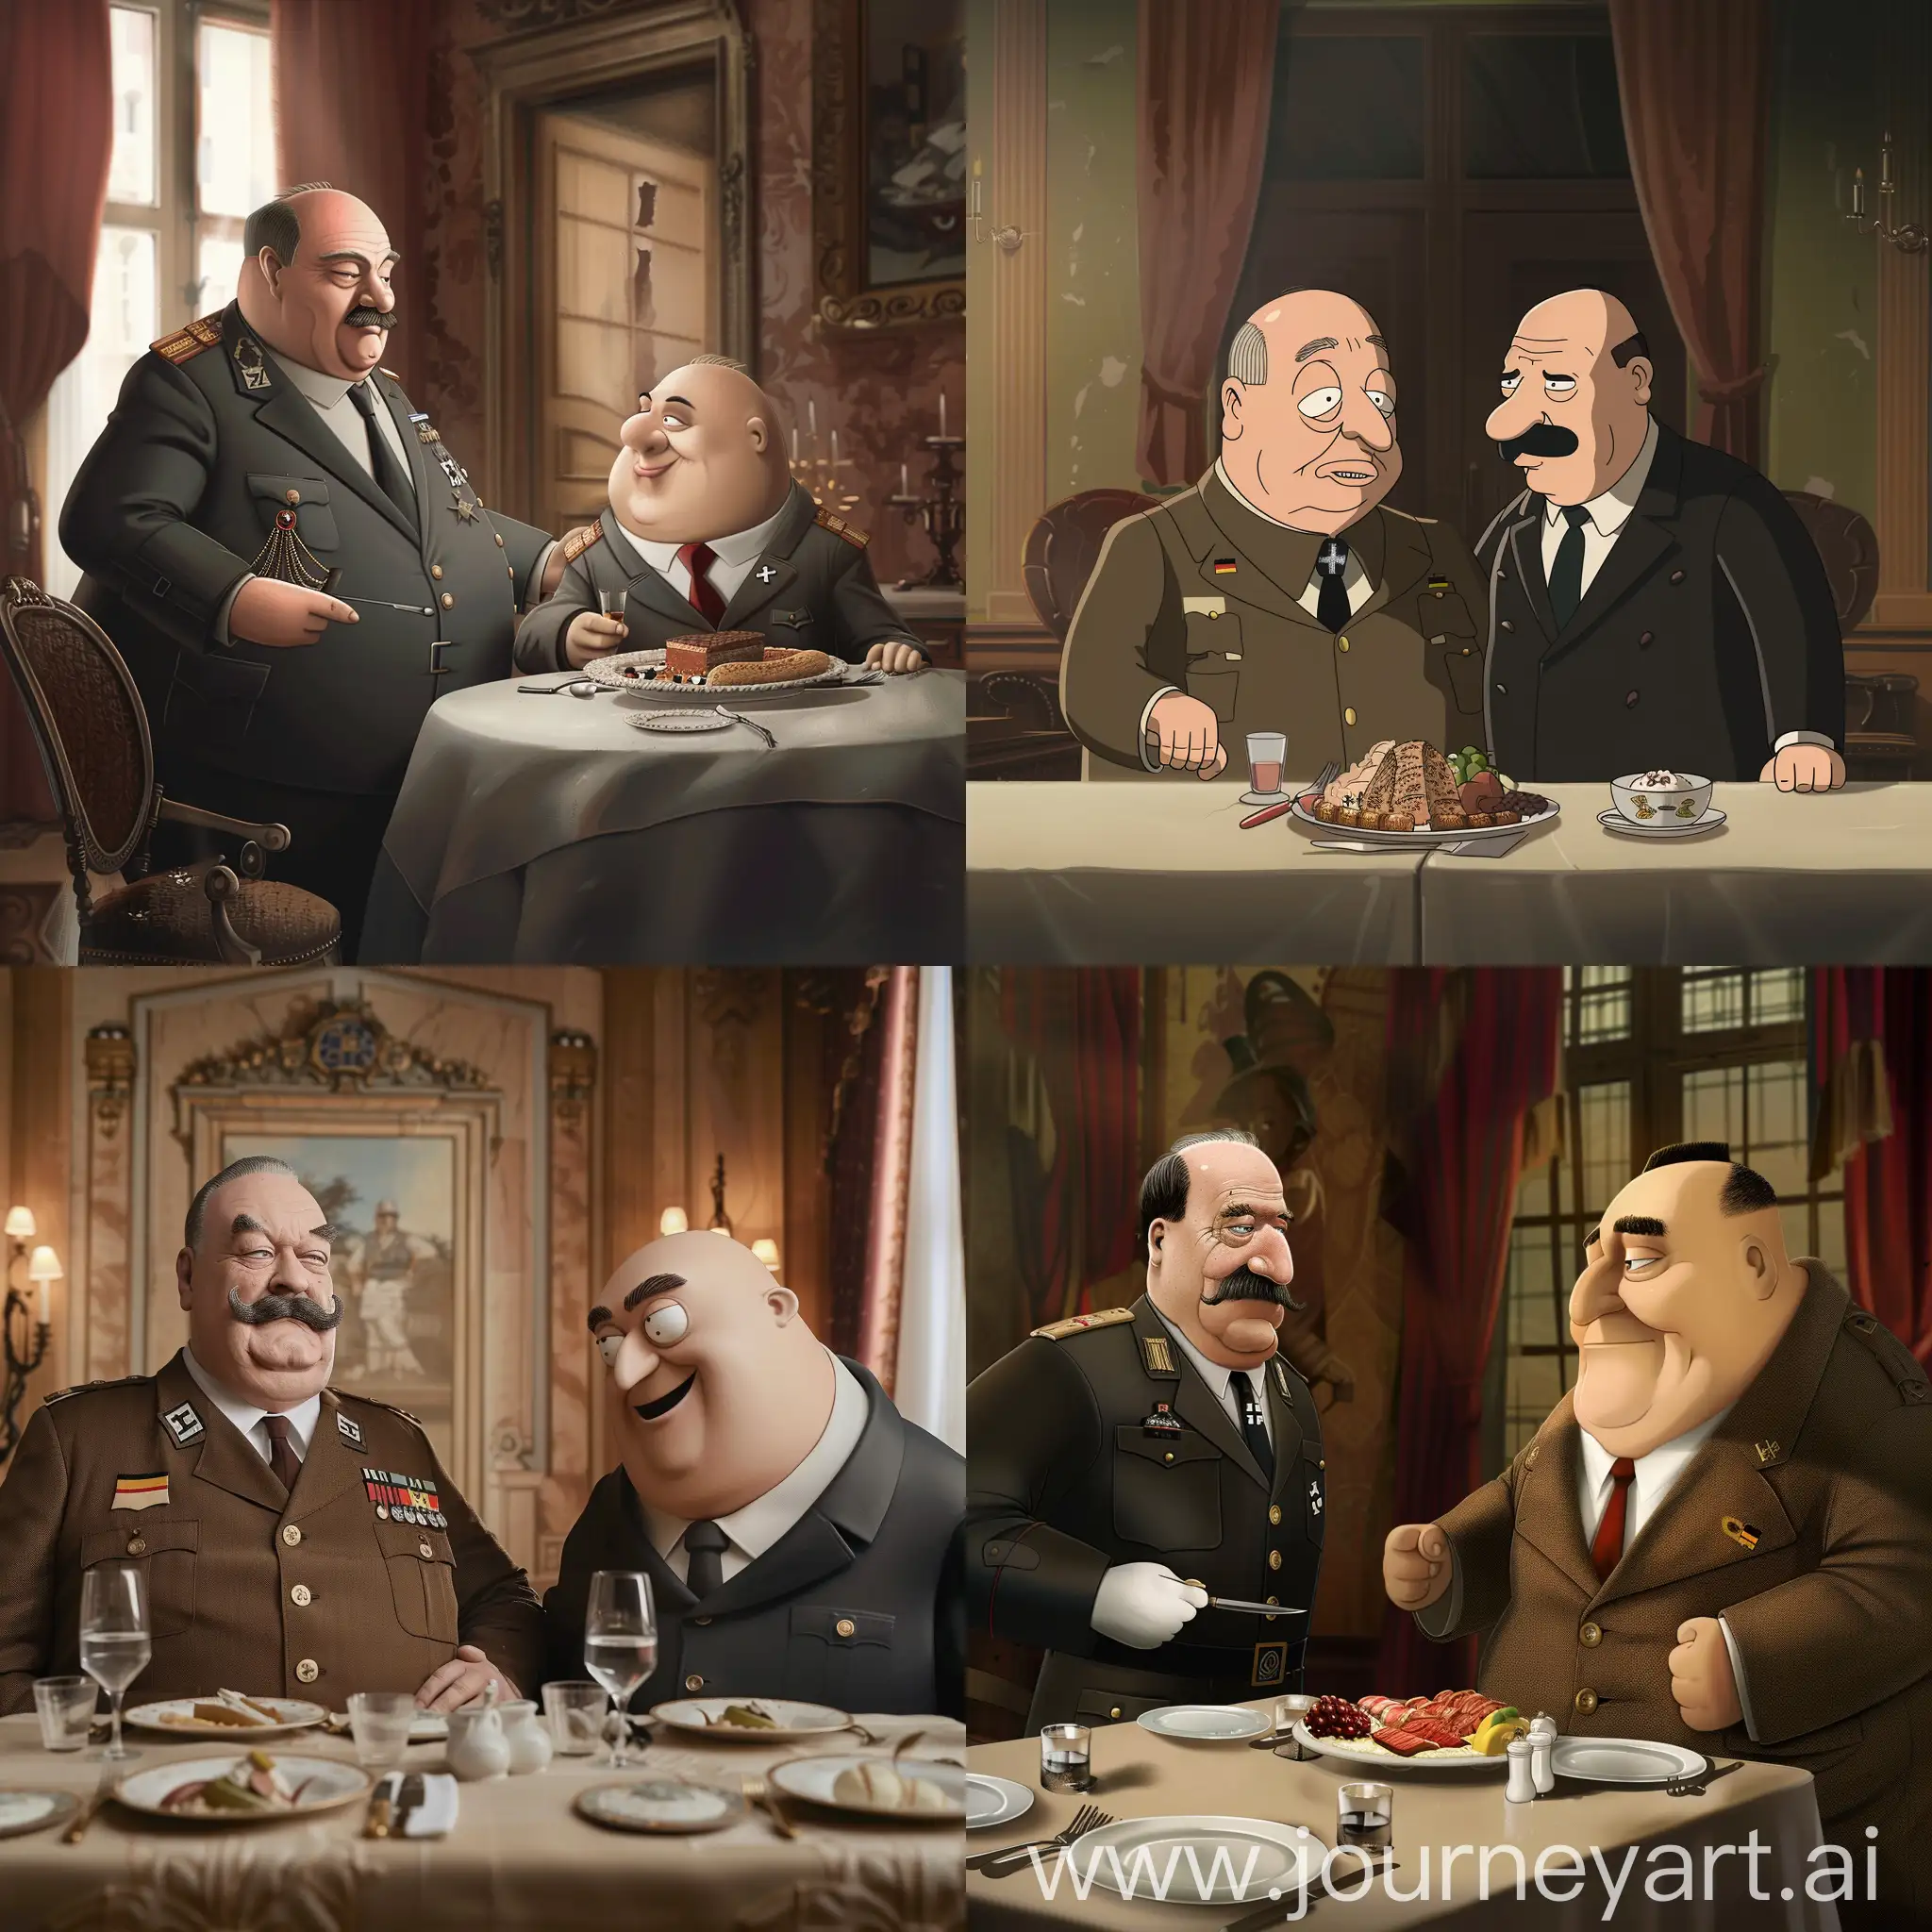 Historical-Dinner-German-Chancellor-1940-and-Peter-Griffin